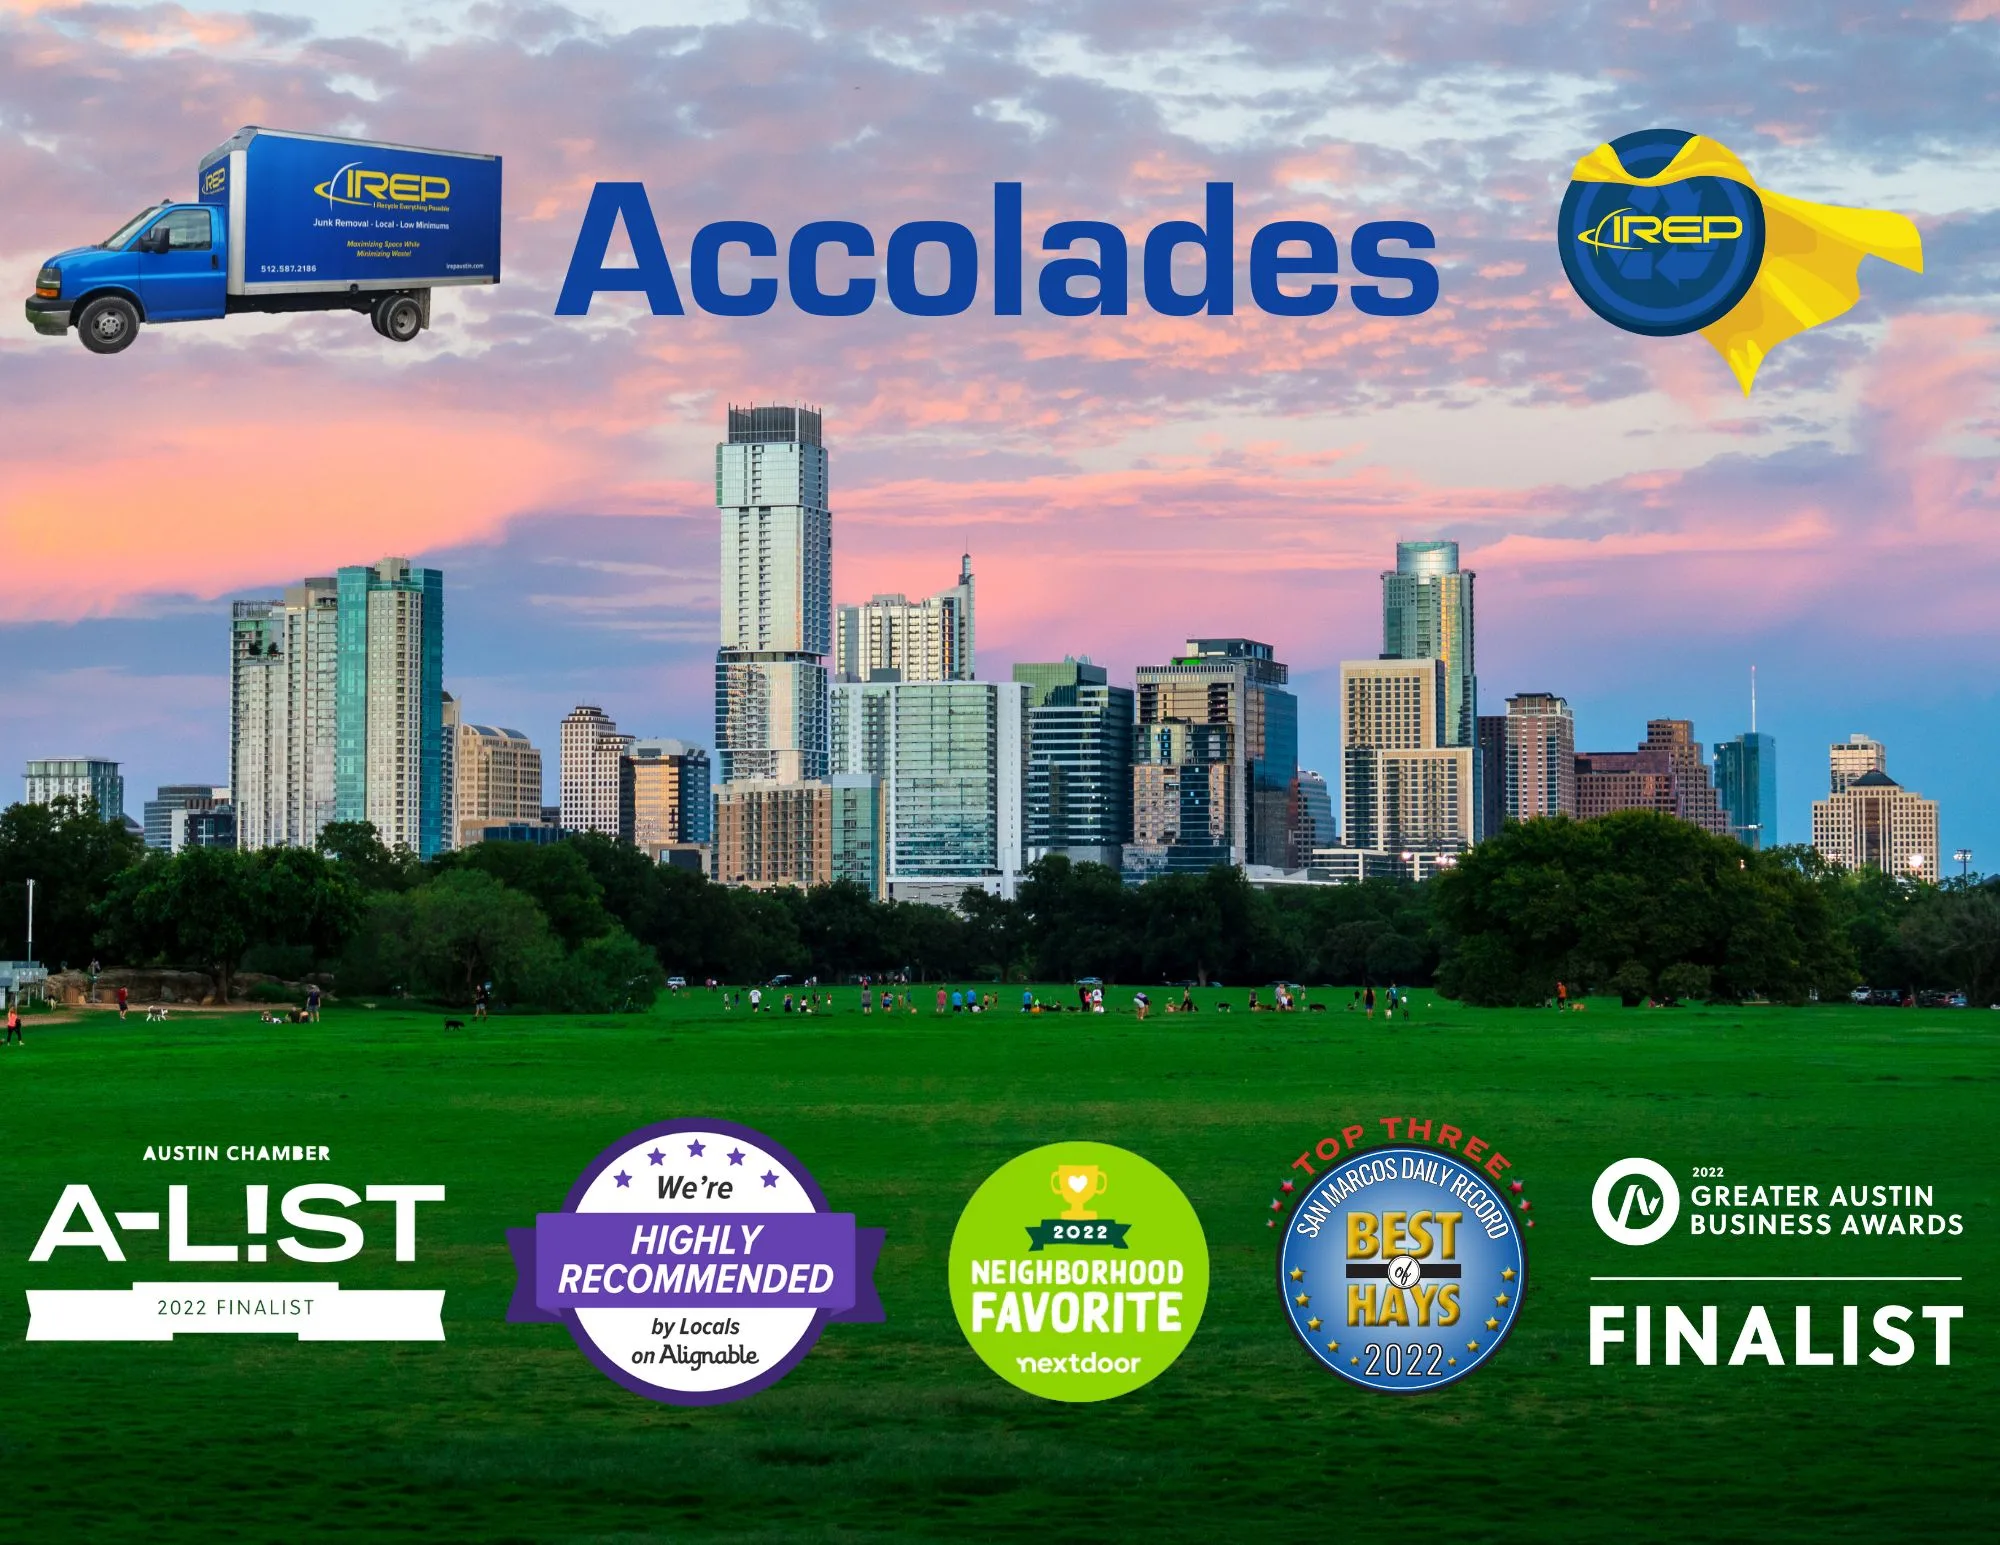 IREP Junk removal truck and recycling shield cape logo accolades a list finalist greater austin business award finalist alignable highly recommended nextdoor favorite best of hays top three